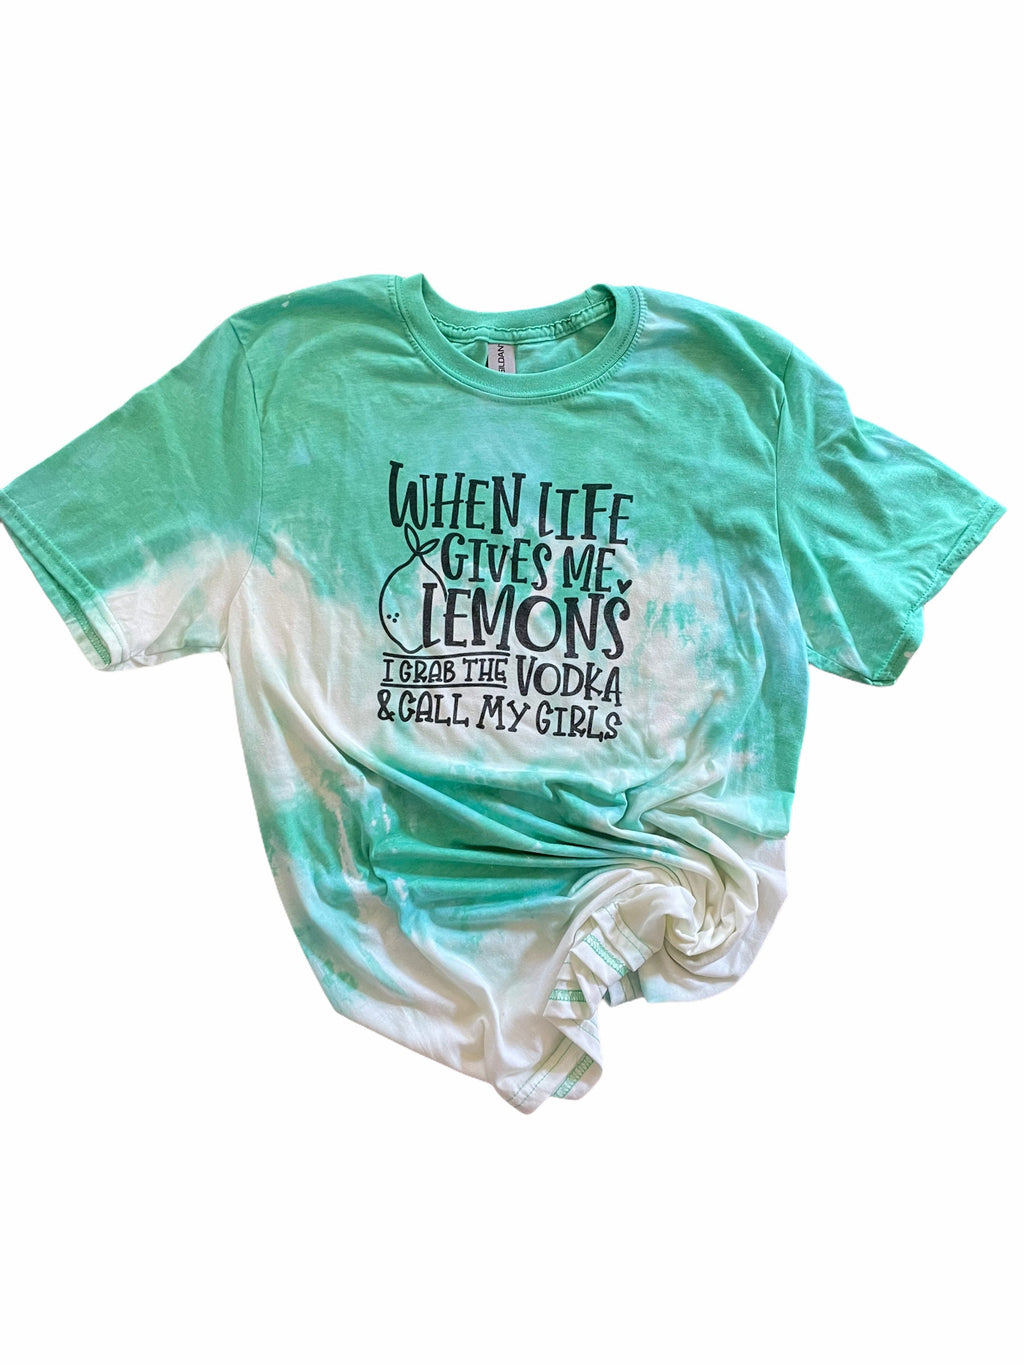 When Life Hands Me Lemons Tee, Graphic Tee, Vintage T-shirt, Bleached Tee